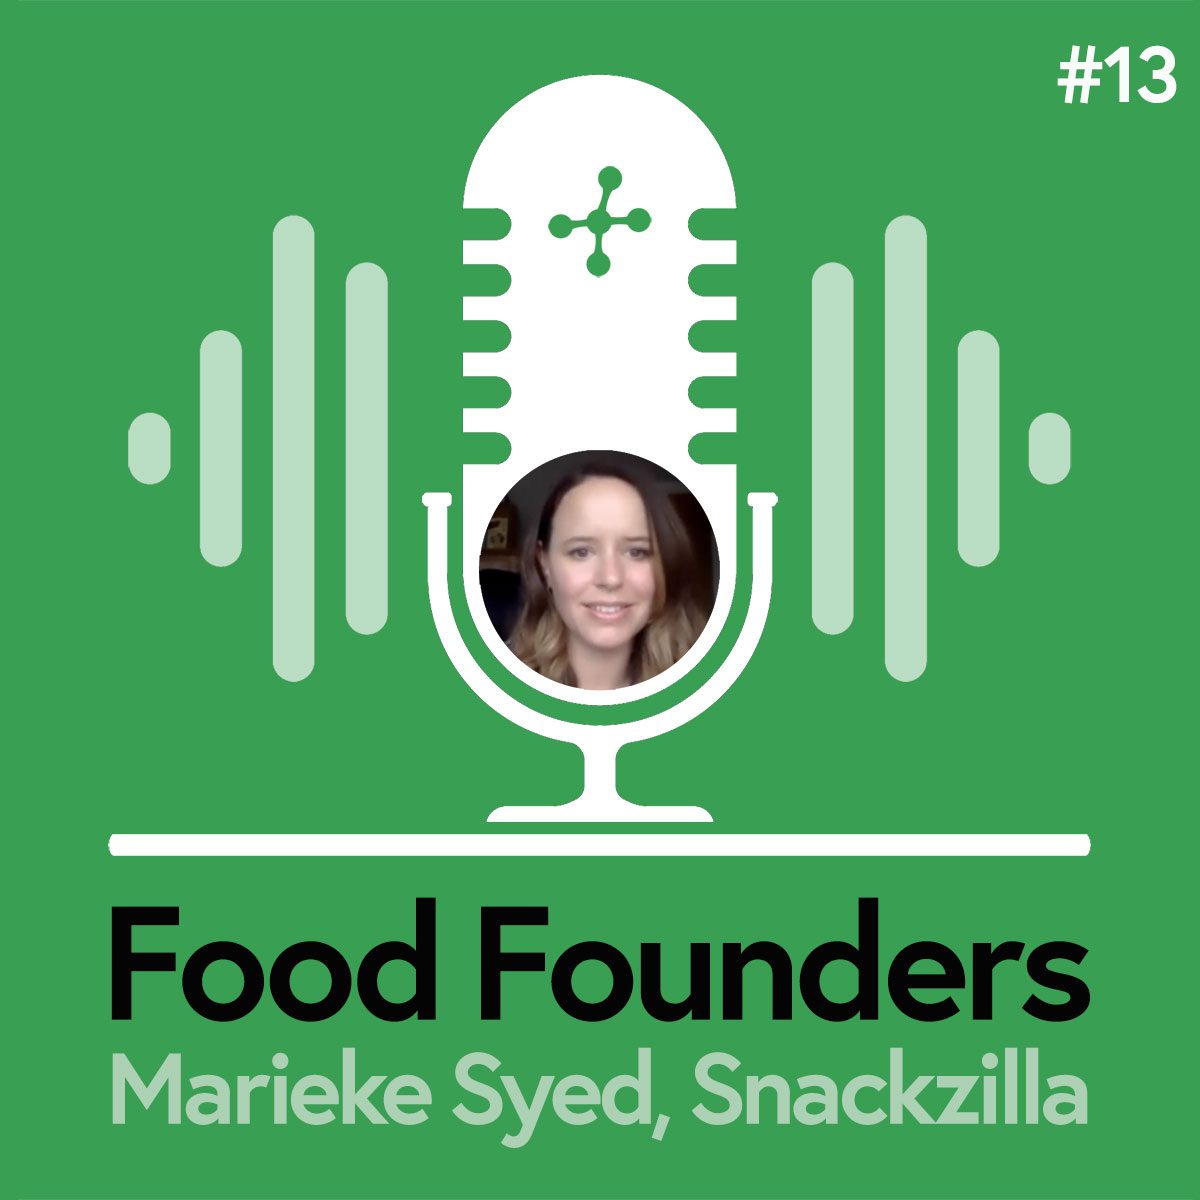 Scaling-up experiences with Marieke from Snackzilla